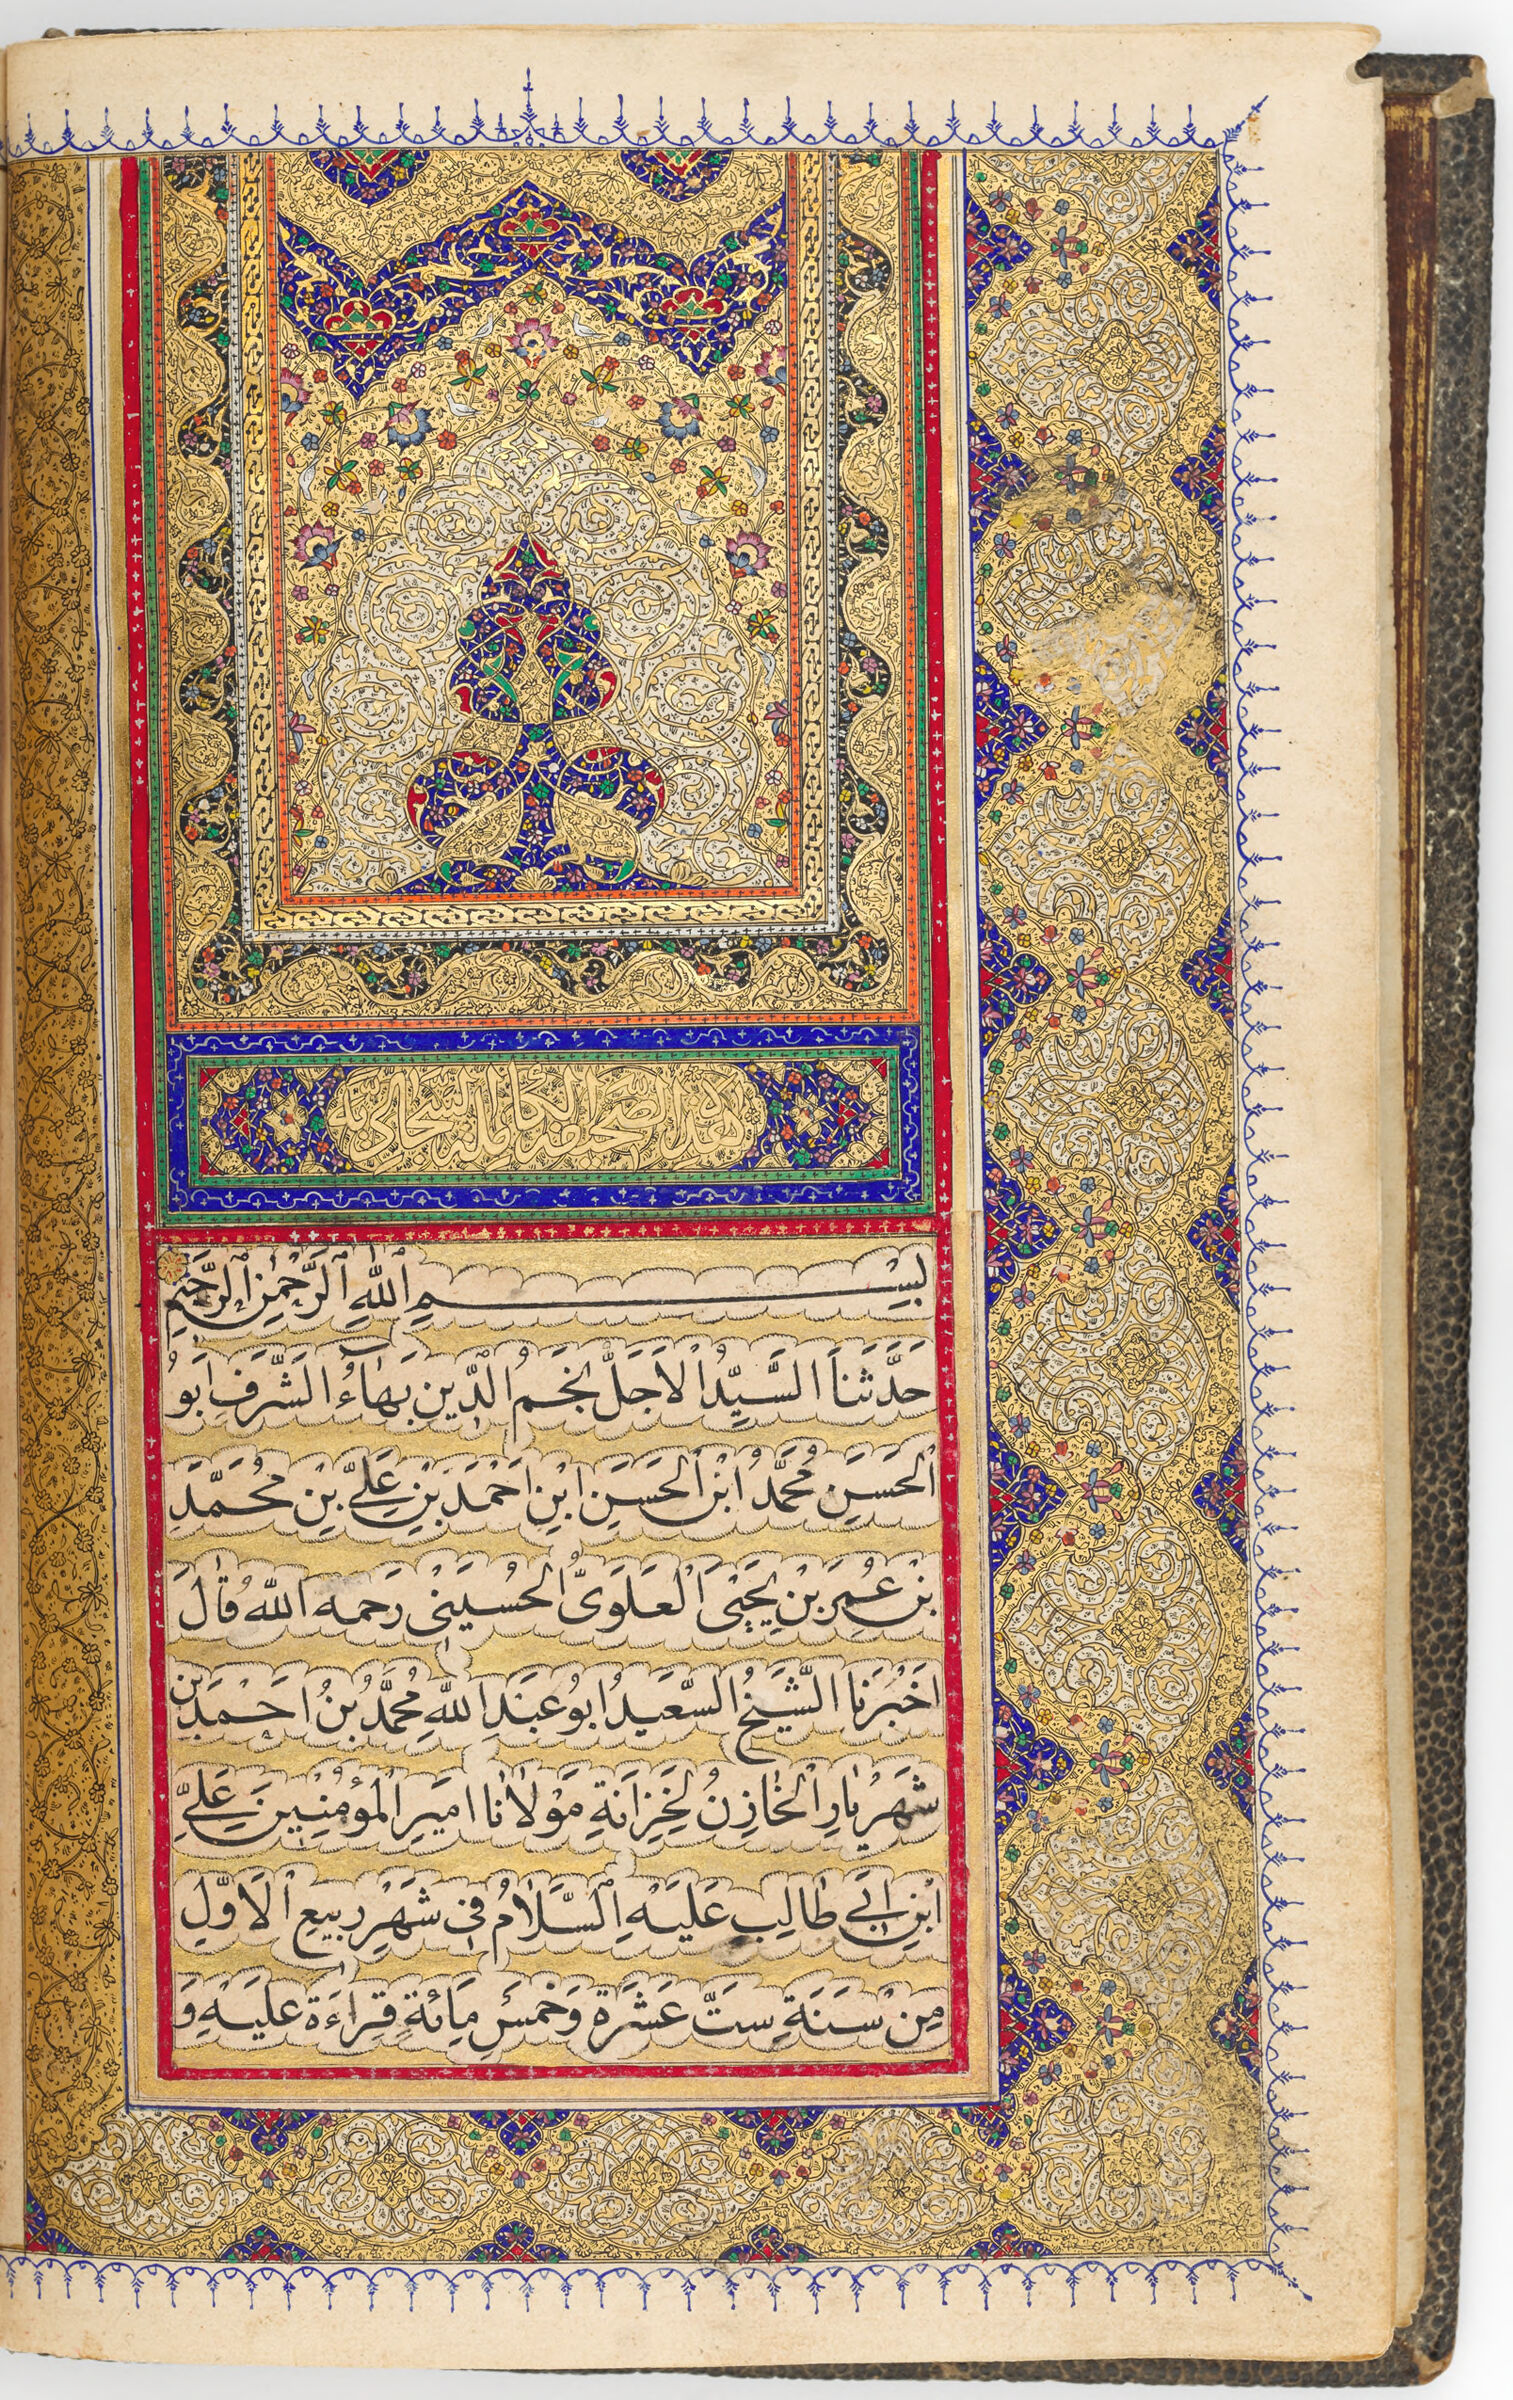 The Right Half Of The Illuminated Frontispiece (Illuminated Sarlawh Verso, Blank Recto Of Folio 3), From A Manuscript Of Prayers